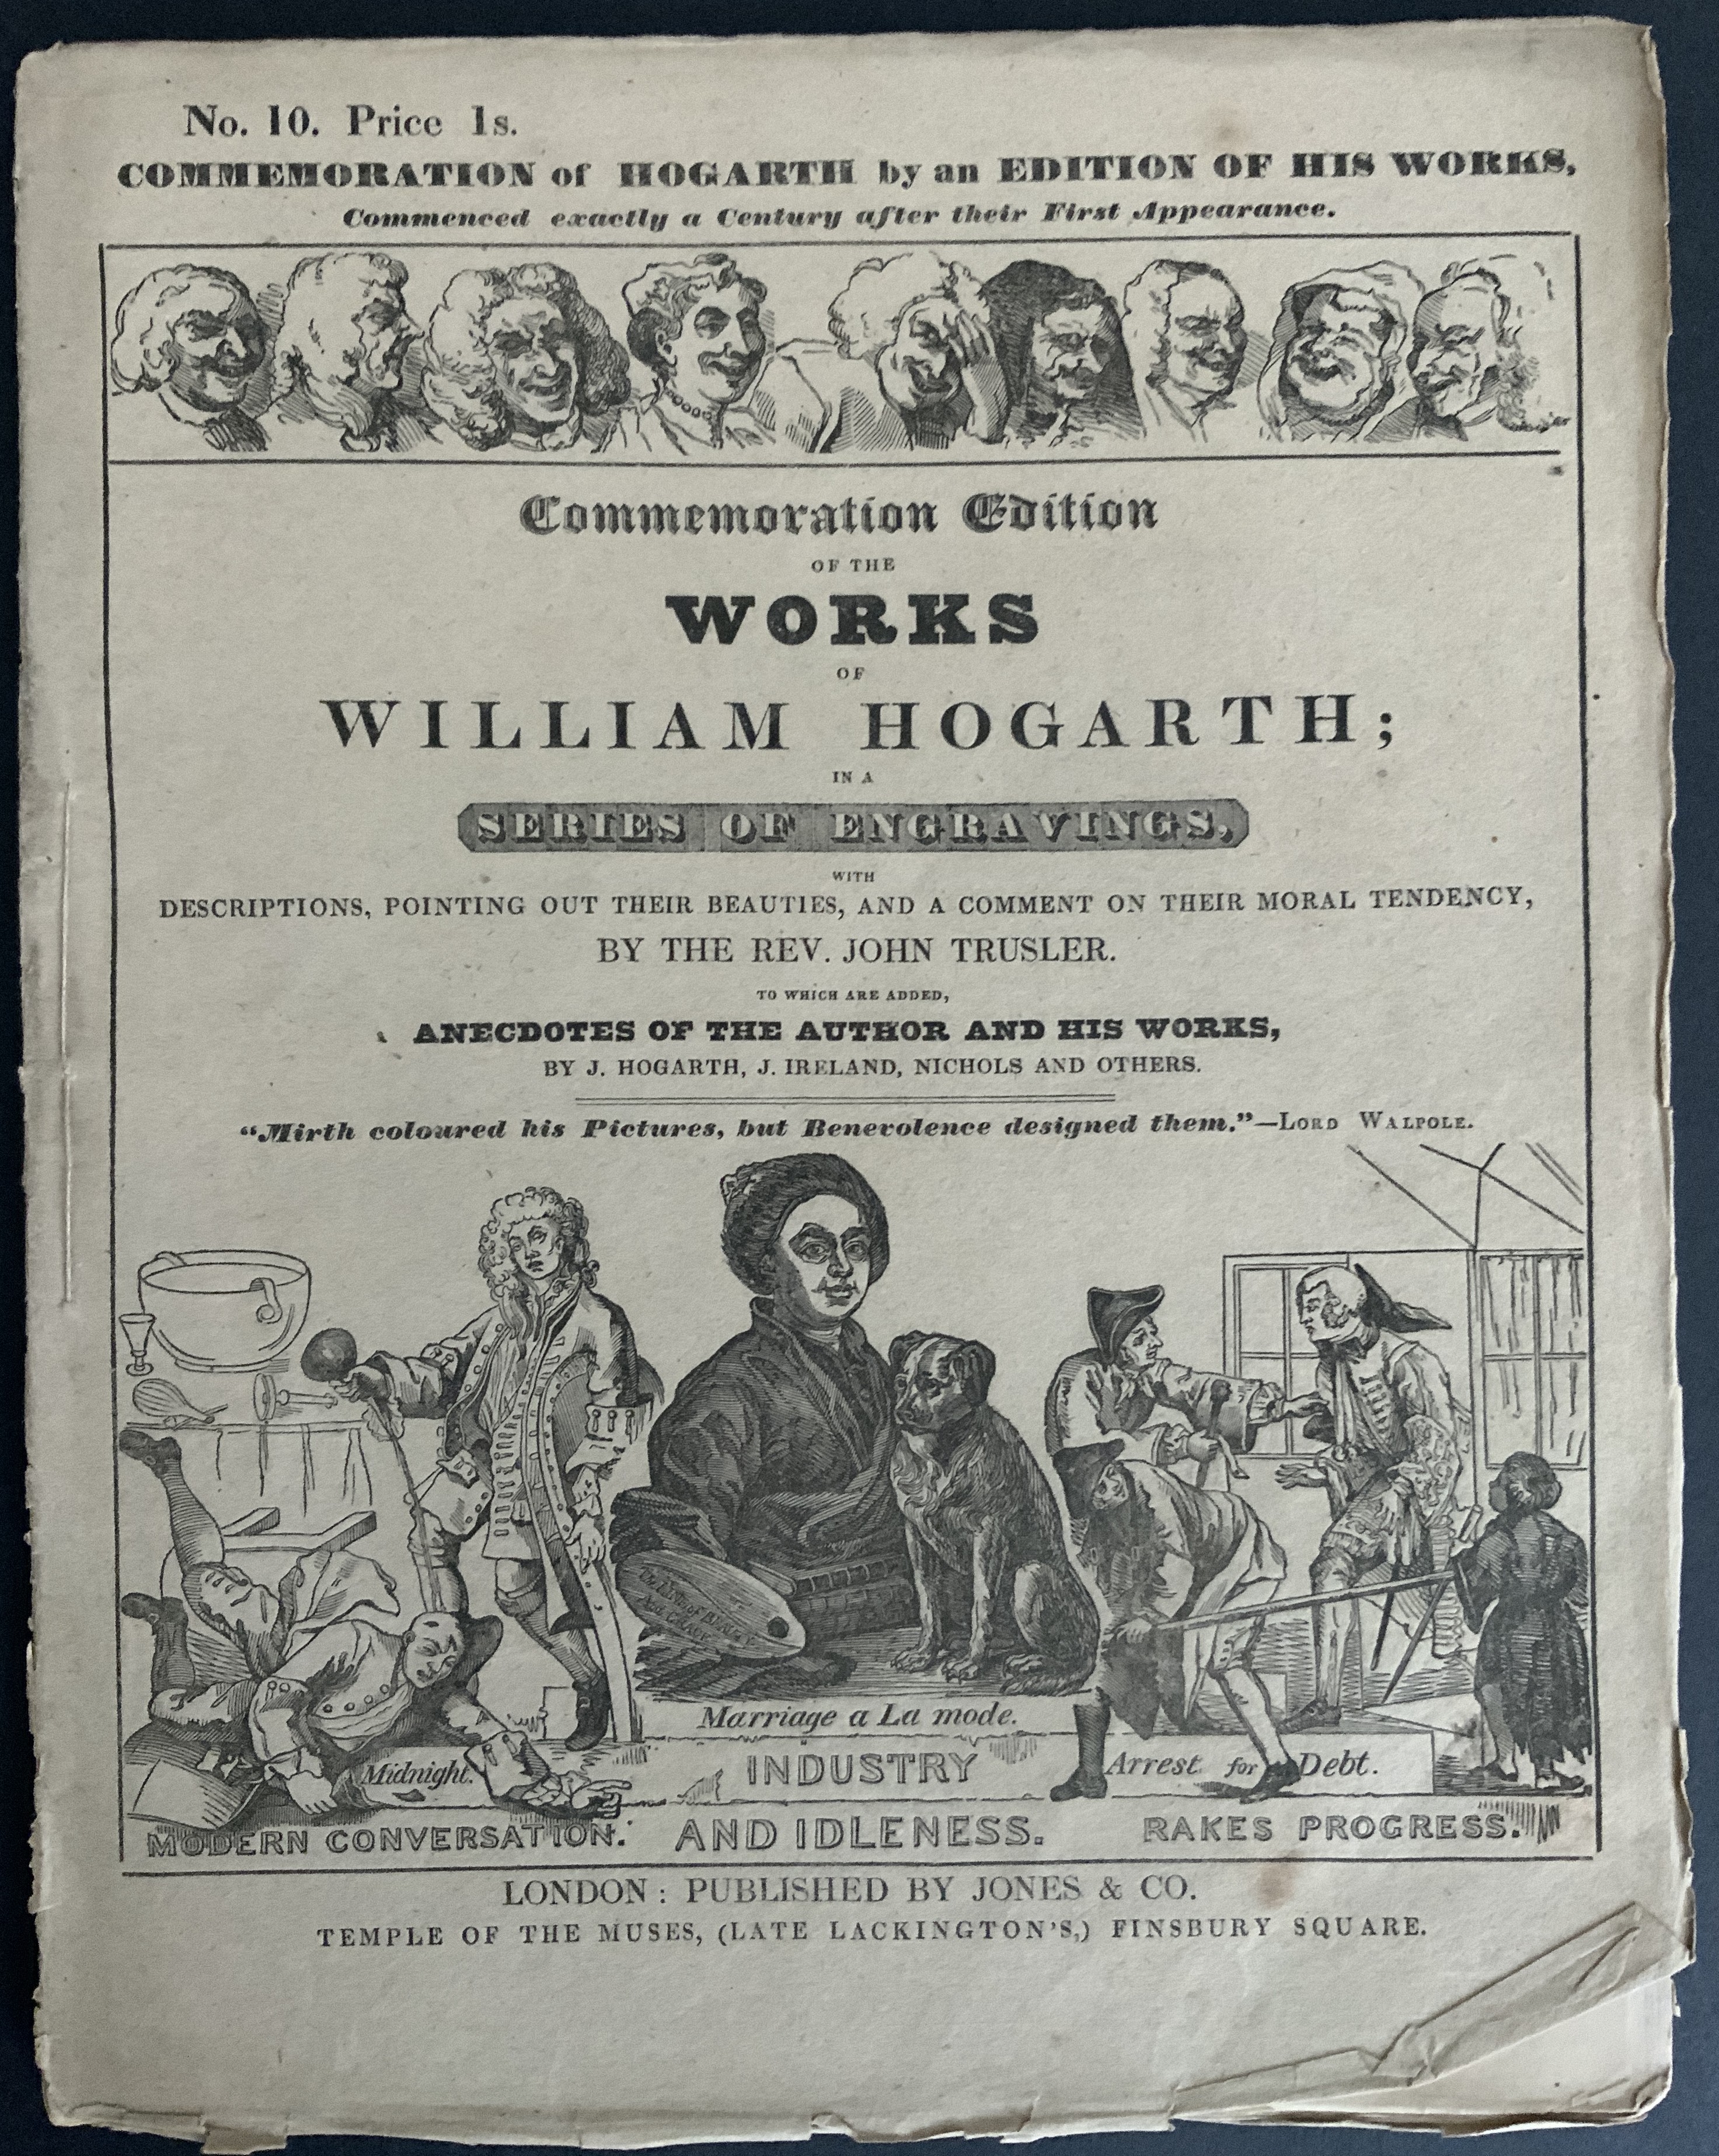 FOUR MAGAZINES OF COMMEMORATION EDITION OF THE WORKS OF WILLIAM HOGARTH IN THE SERIES OF ENGRAVINGS - Image 7 of 8